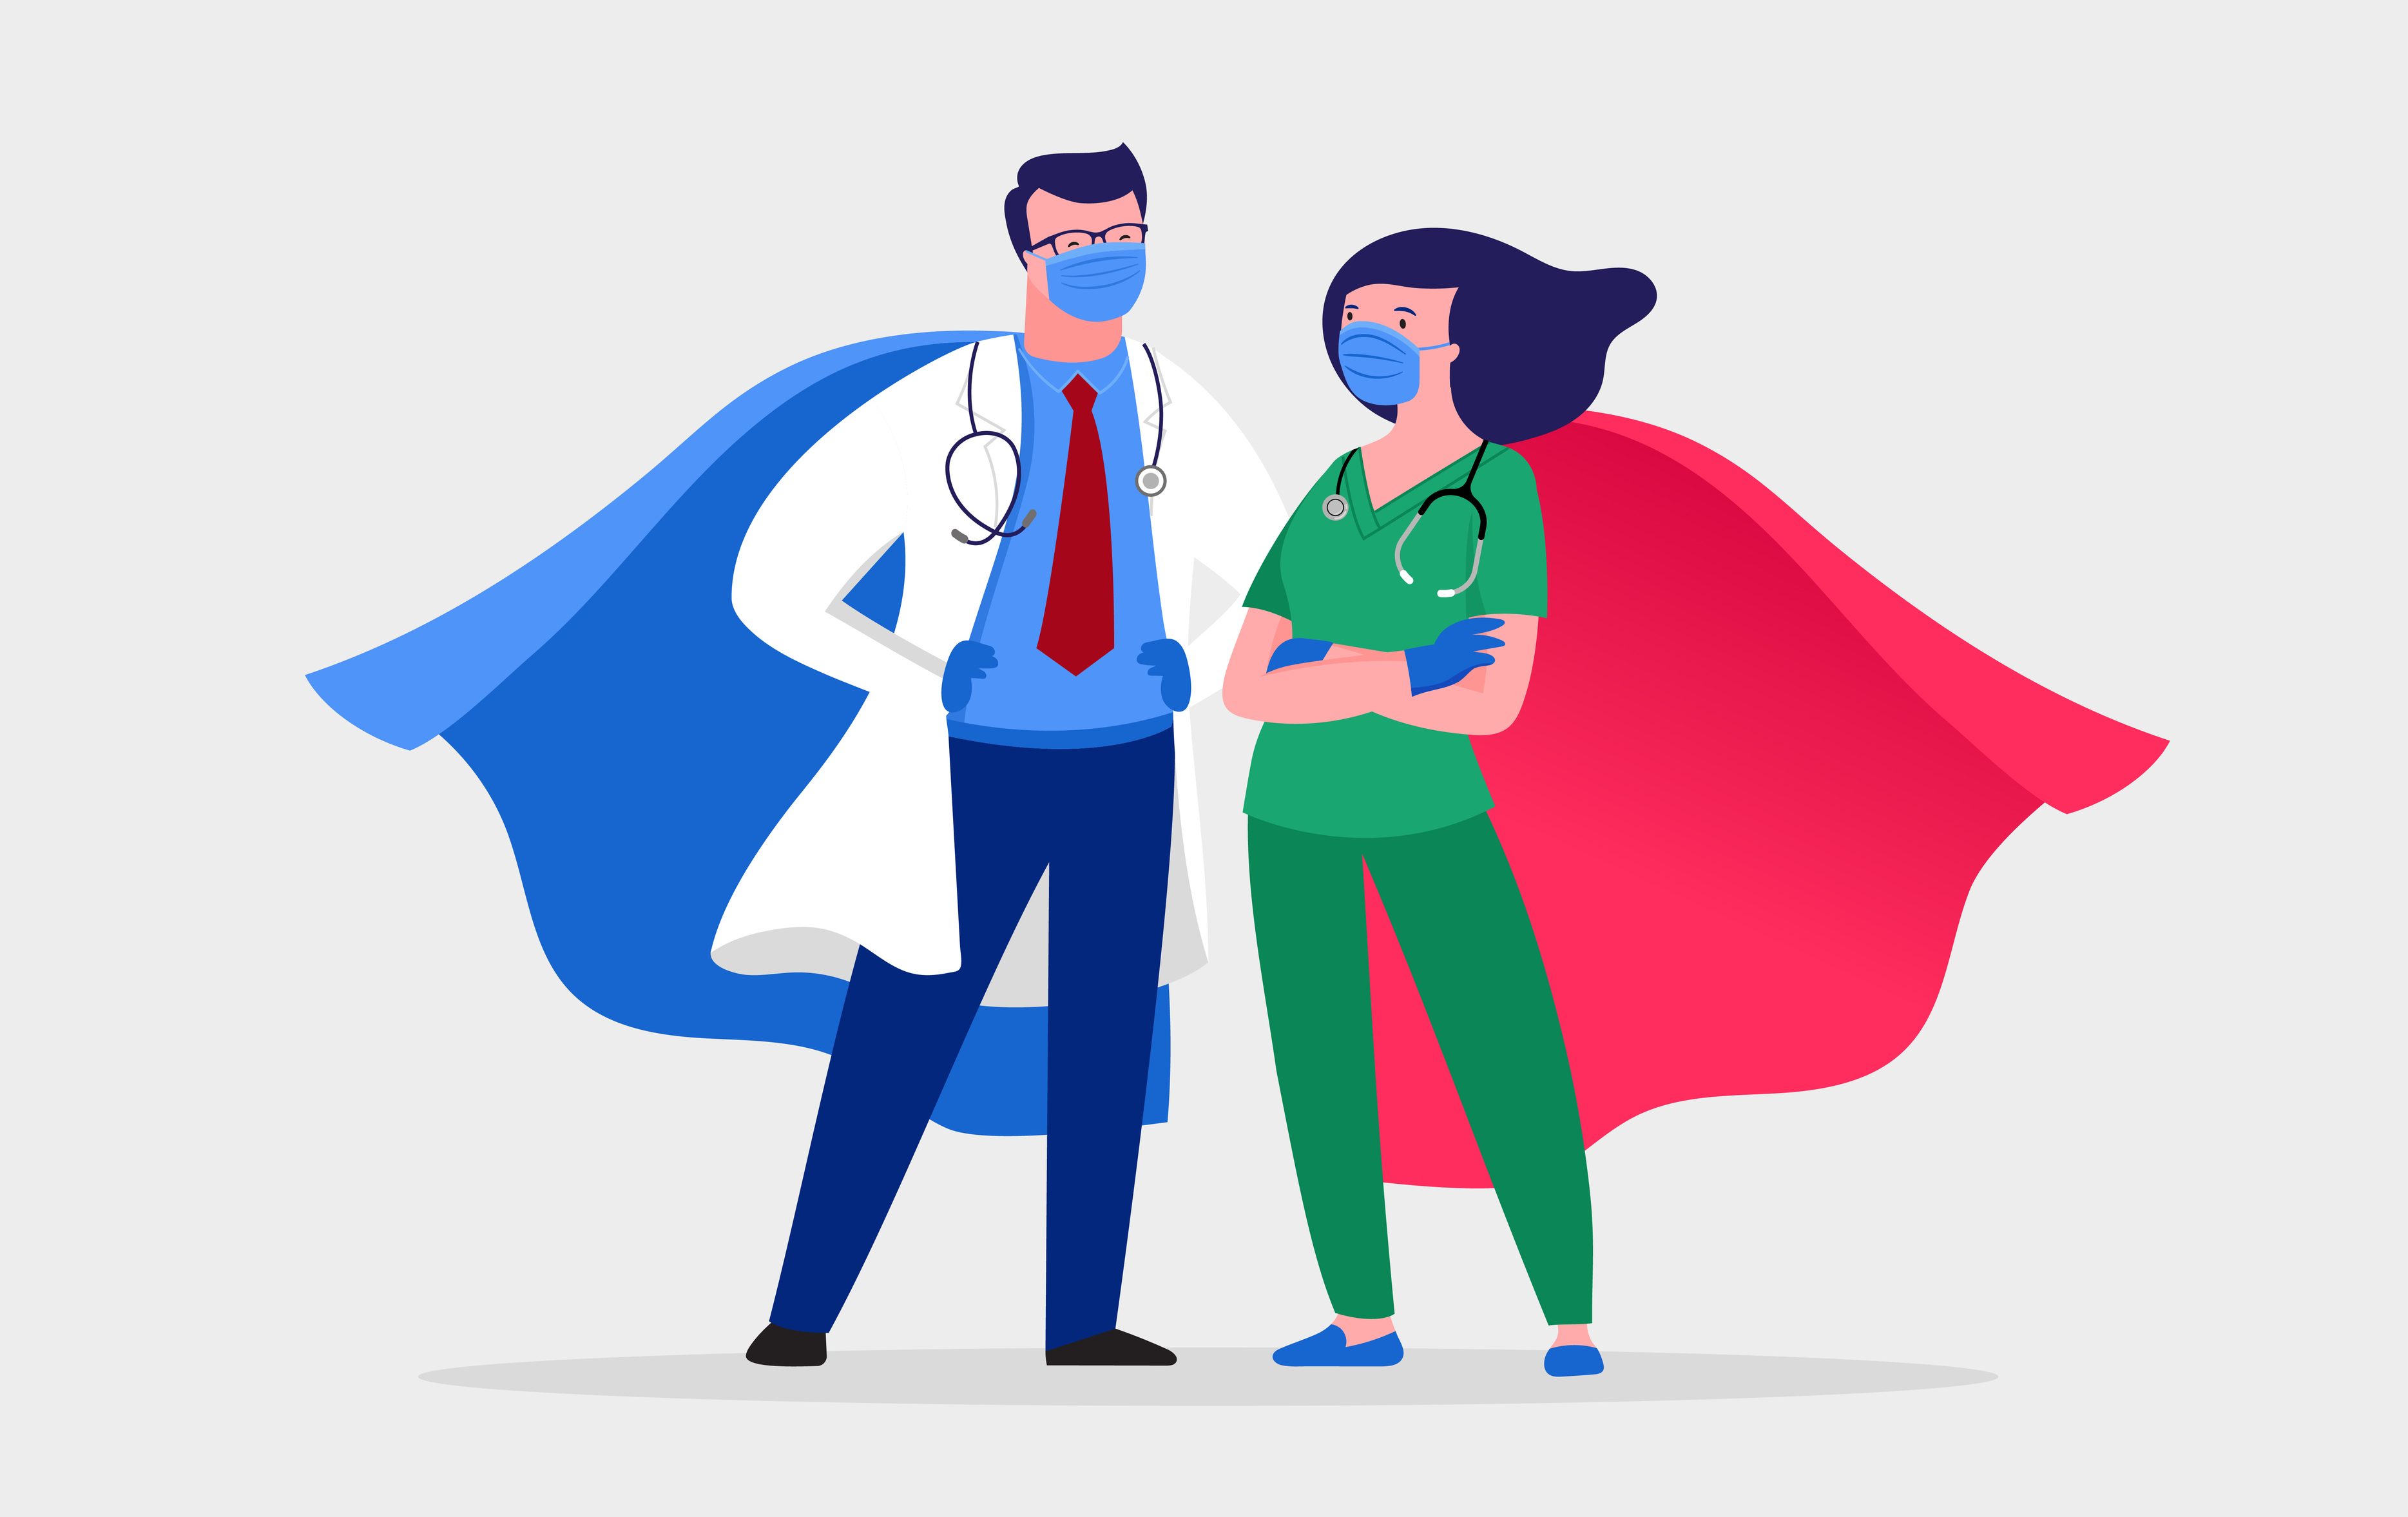 Freebies, Discounts, & Perks for Healthcare’s Heroes